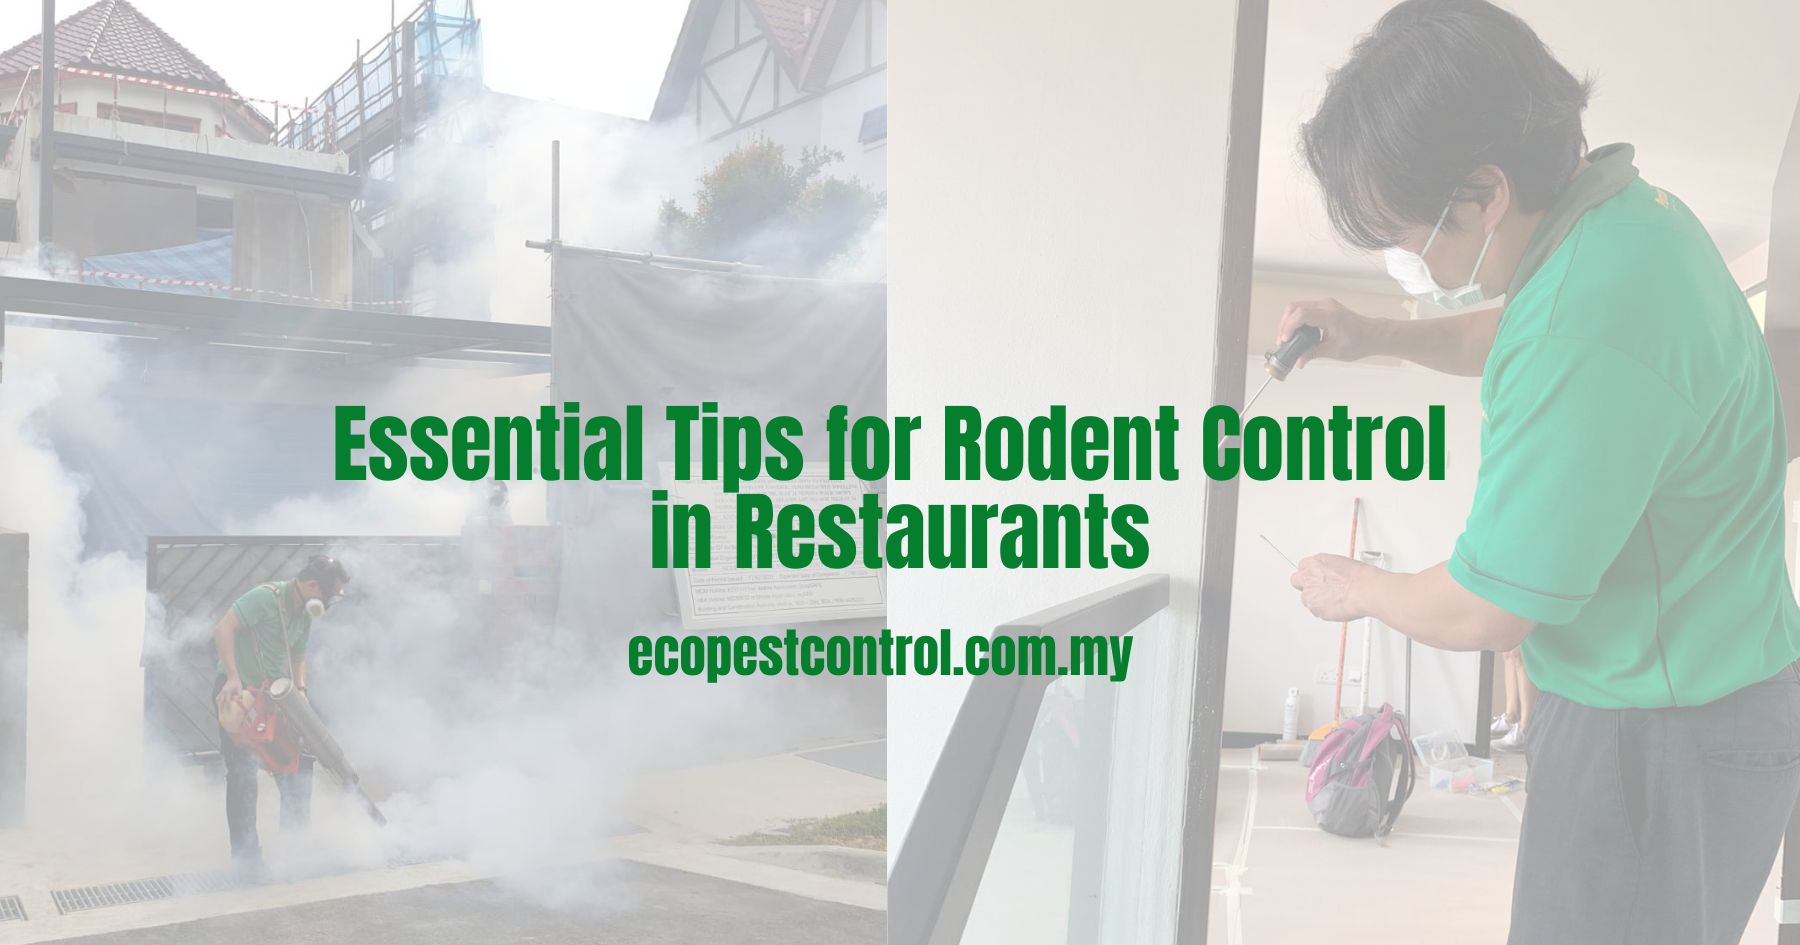 Essential Tips for Rodent Control in Restaurants